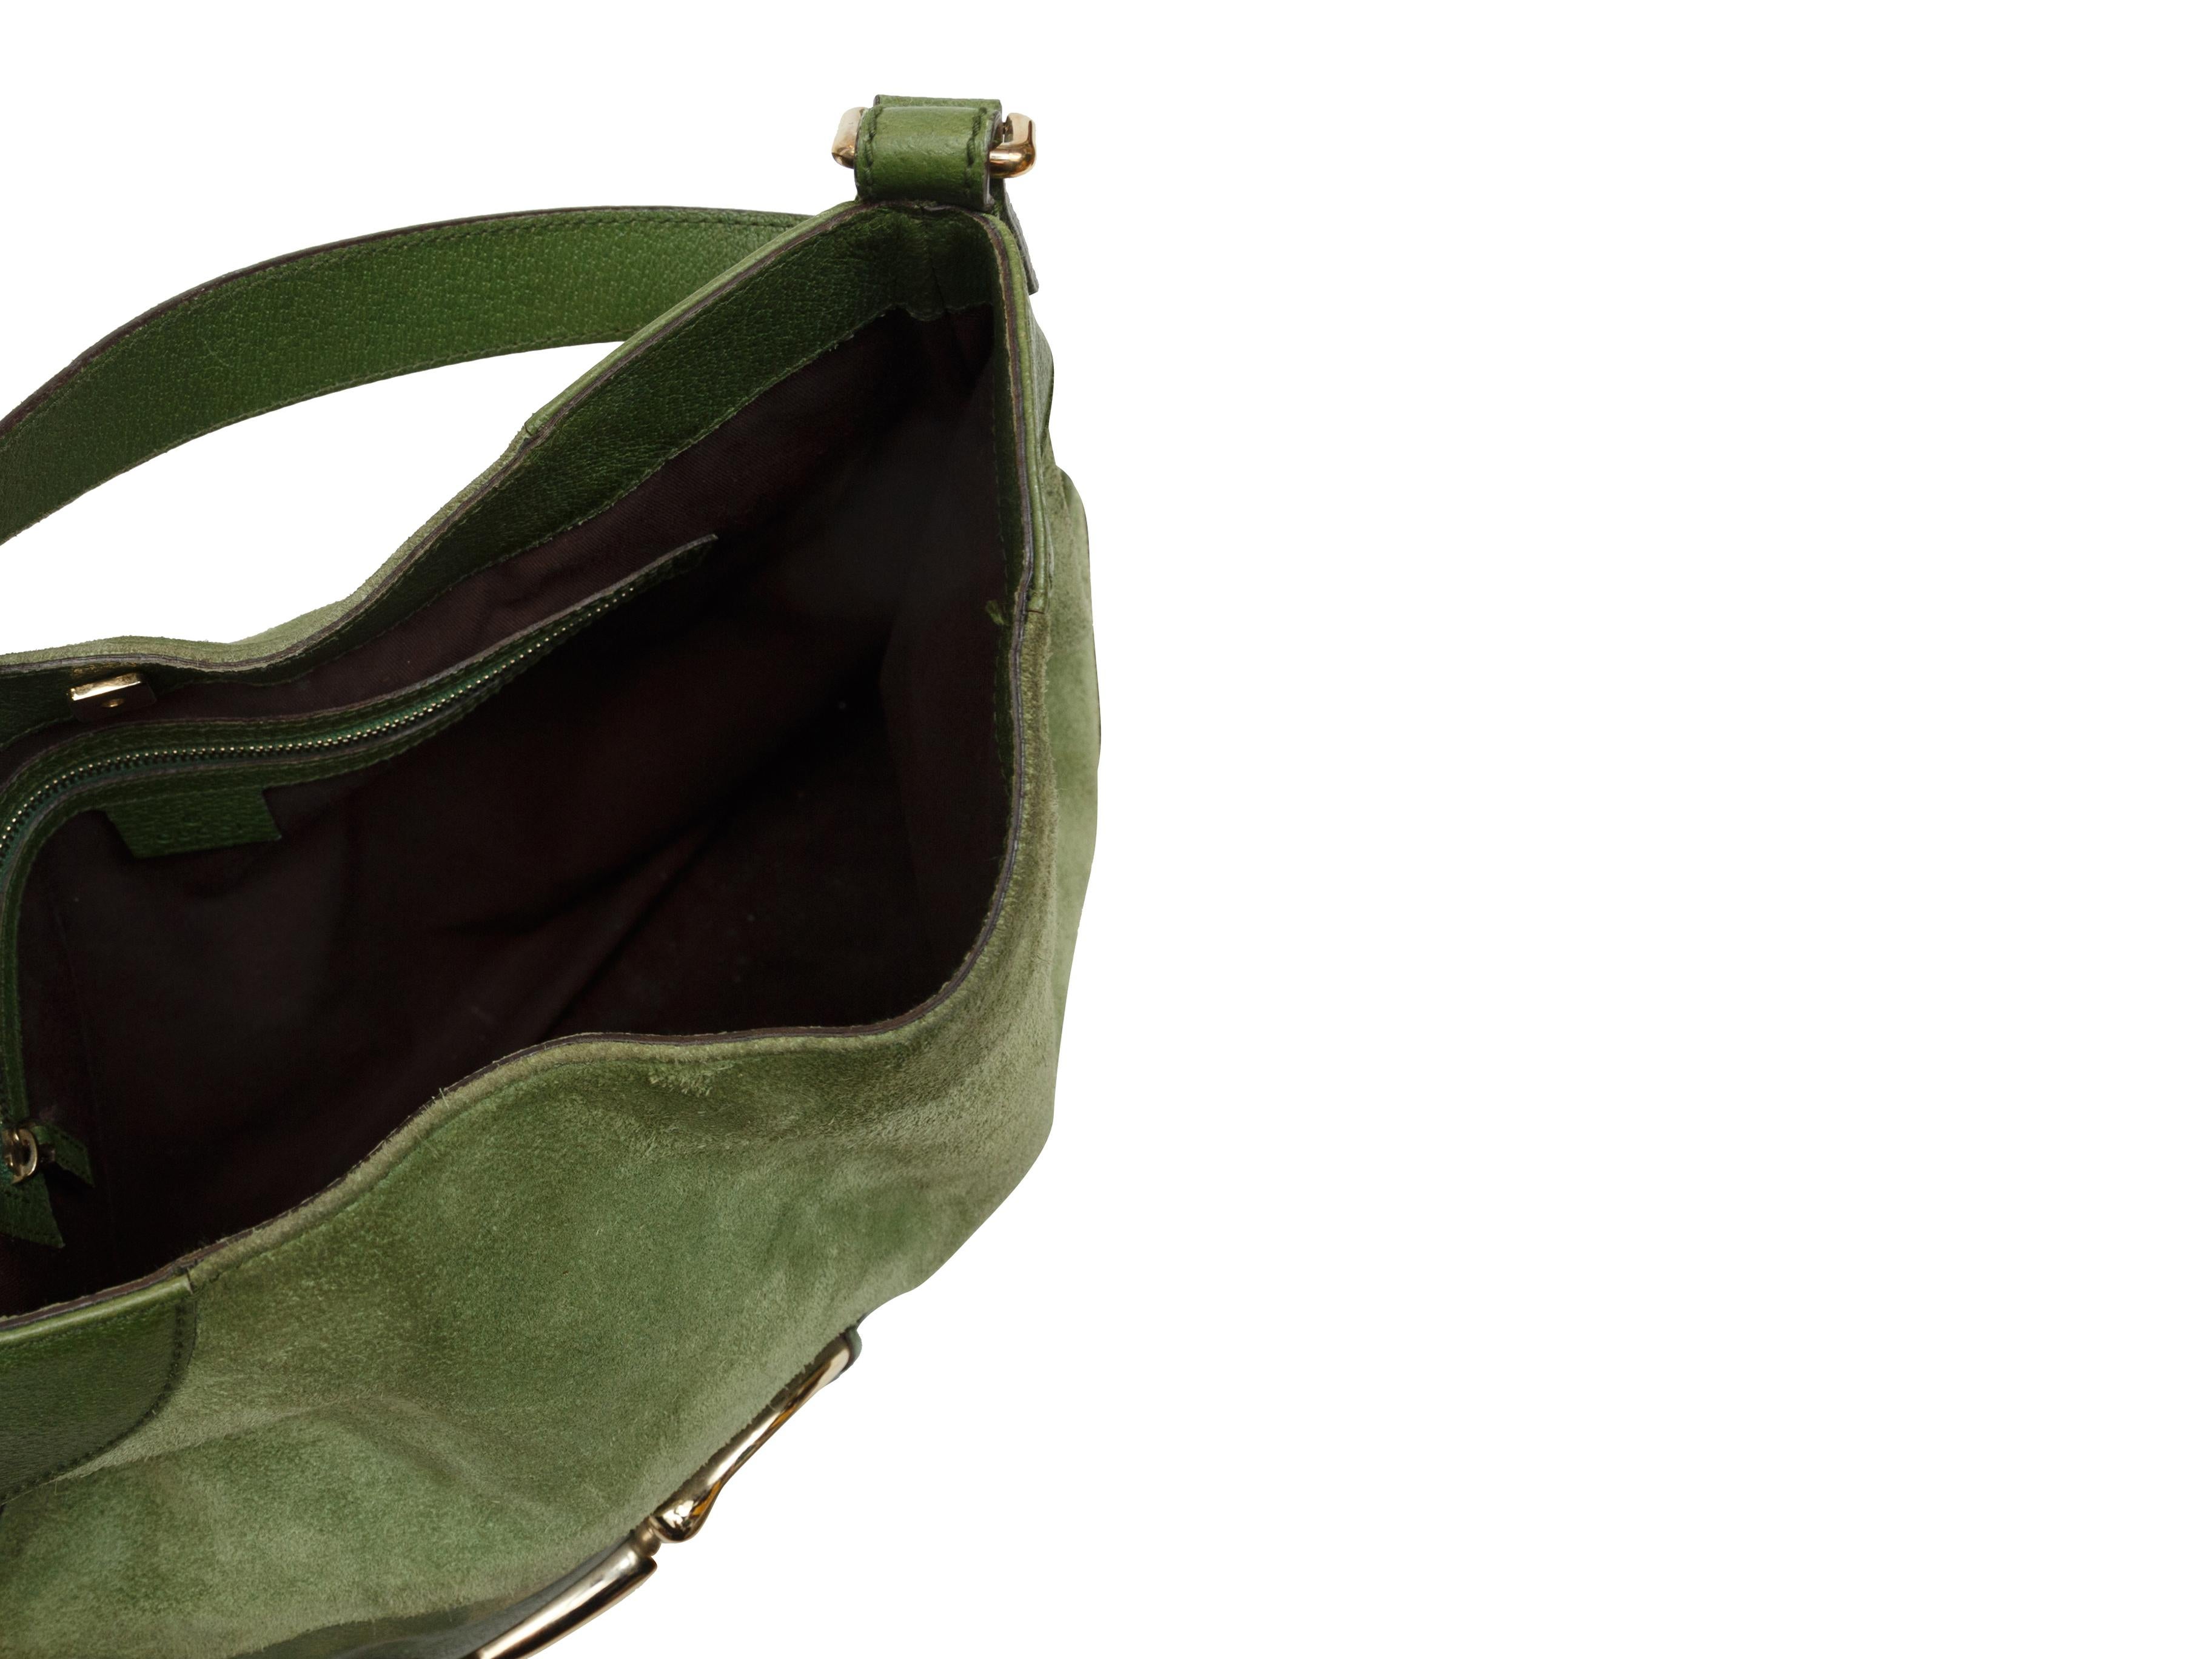 Product details: Green suede Hassler Hobo shoulder bag by Gucci. Tonal leather trim throughout. Gold-tone horsebit accent at front. 16